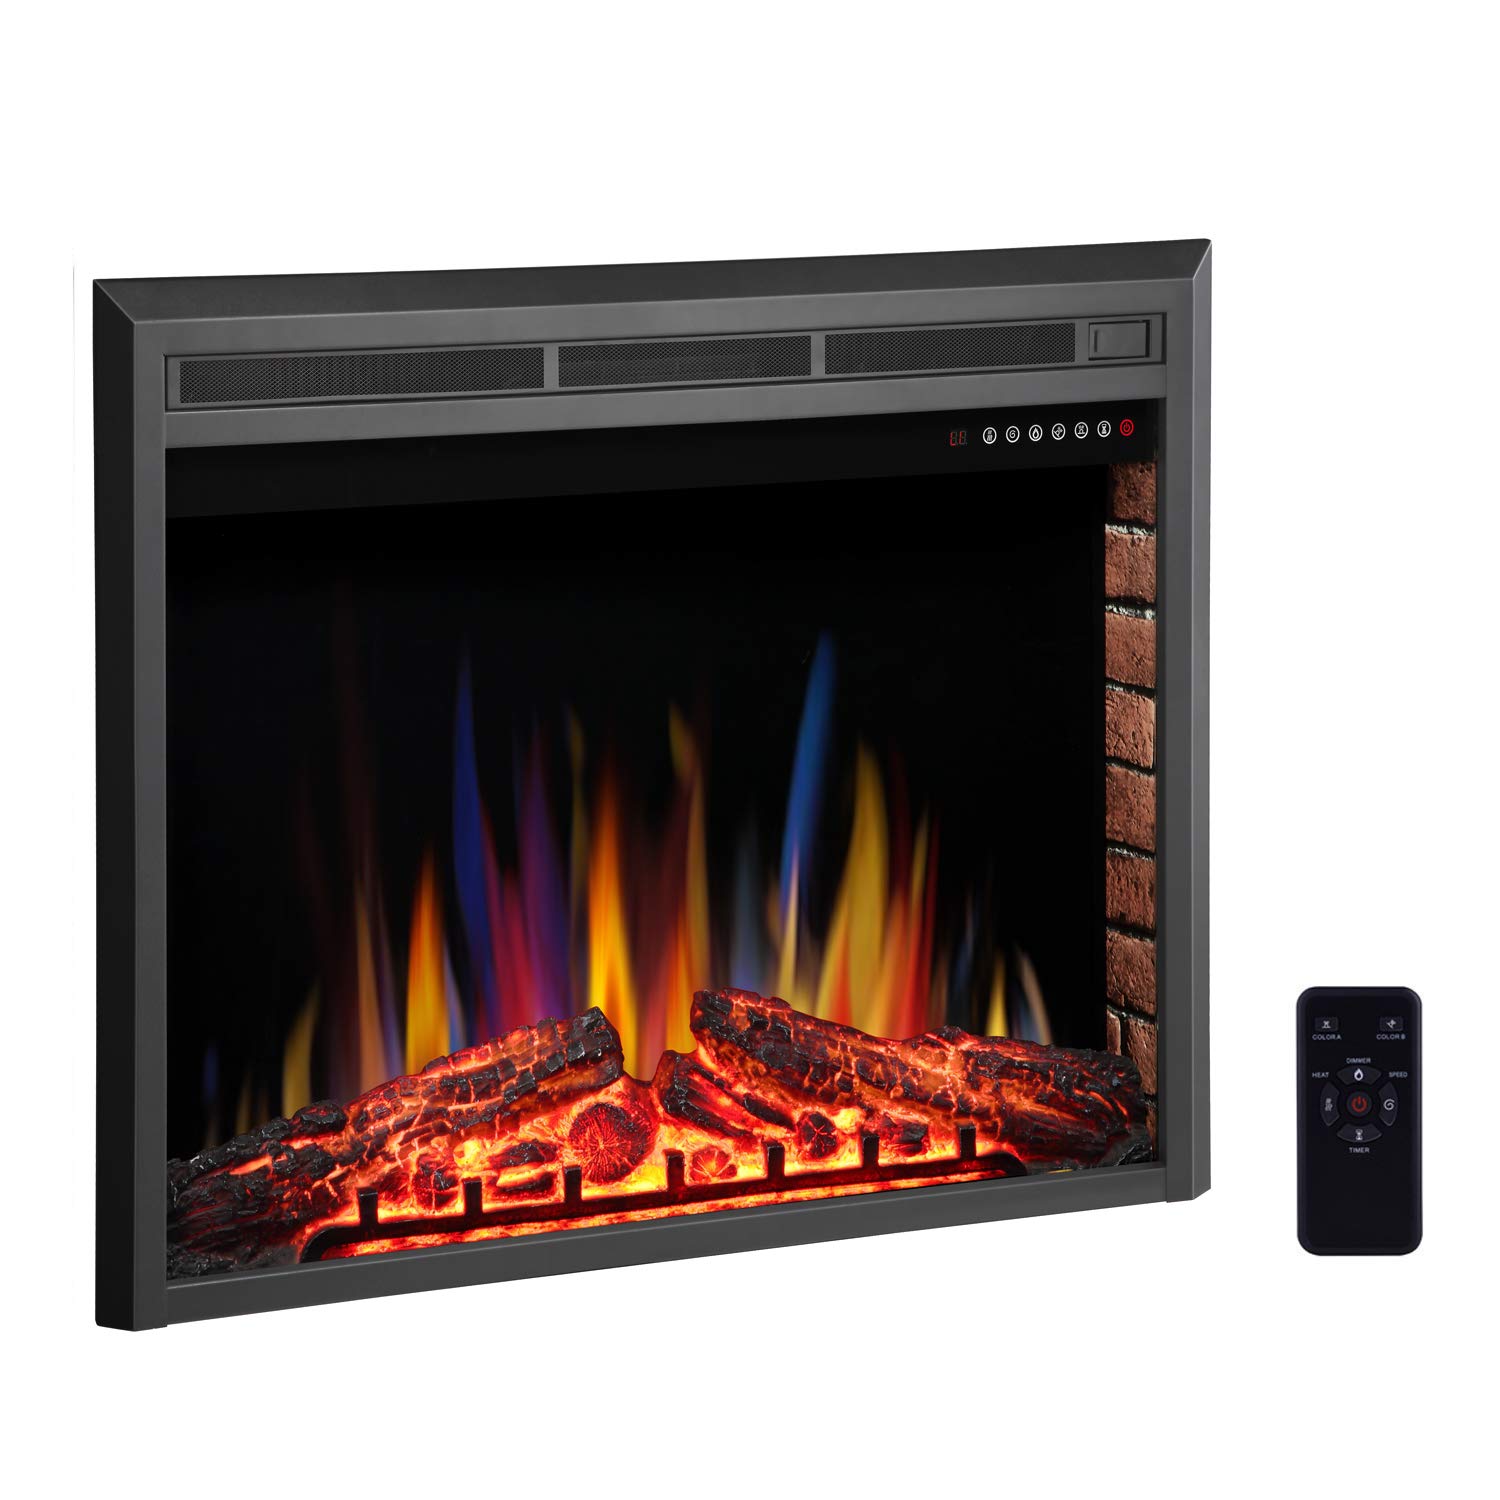 Wall Recessed Electric Fireplace New Rwflame 28" Electric Fireplace Insert Freestanding & Recessed Electric Stove Heater touch Screen Remote Control 750w 1500w with Timer & Colorful Flame